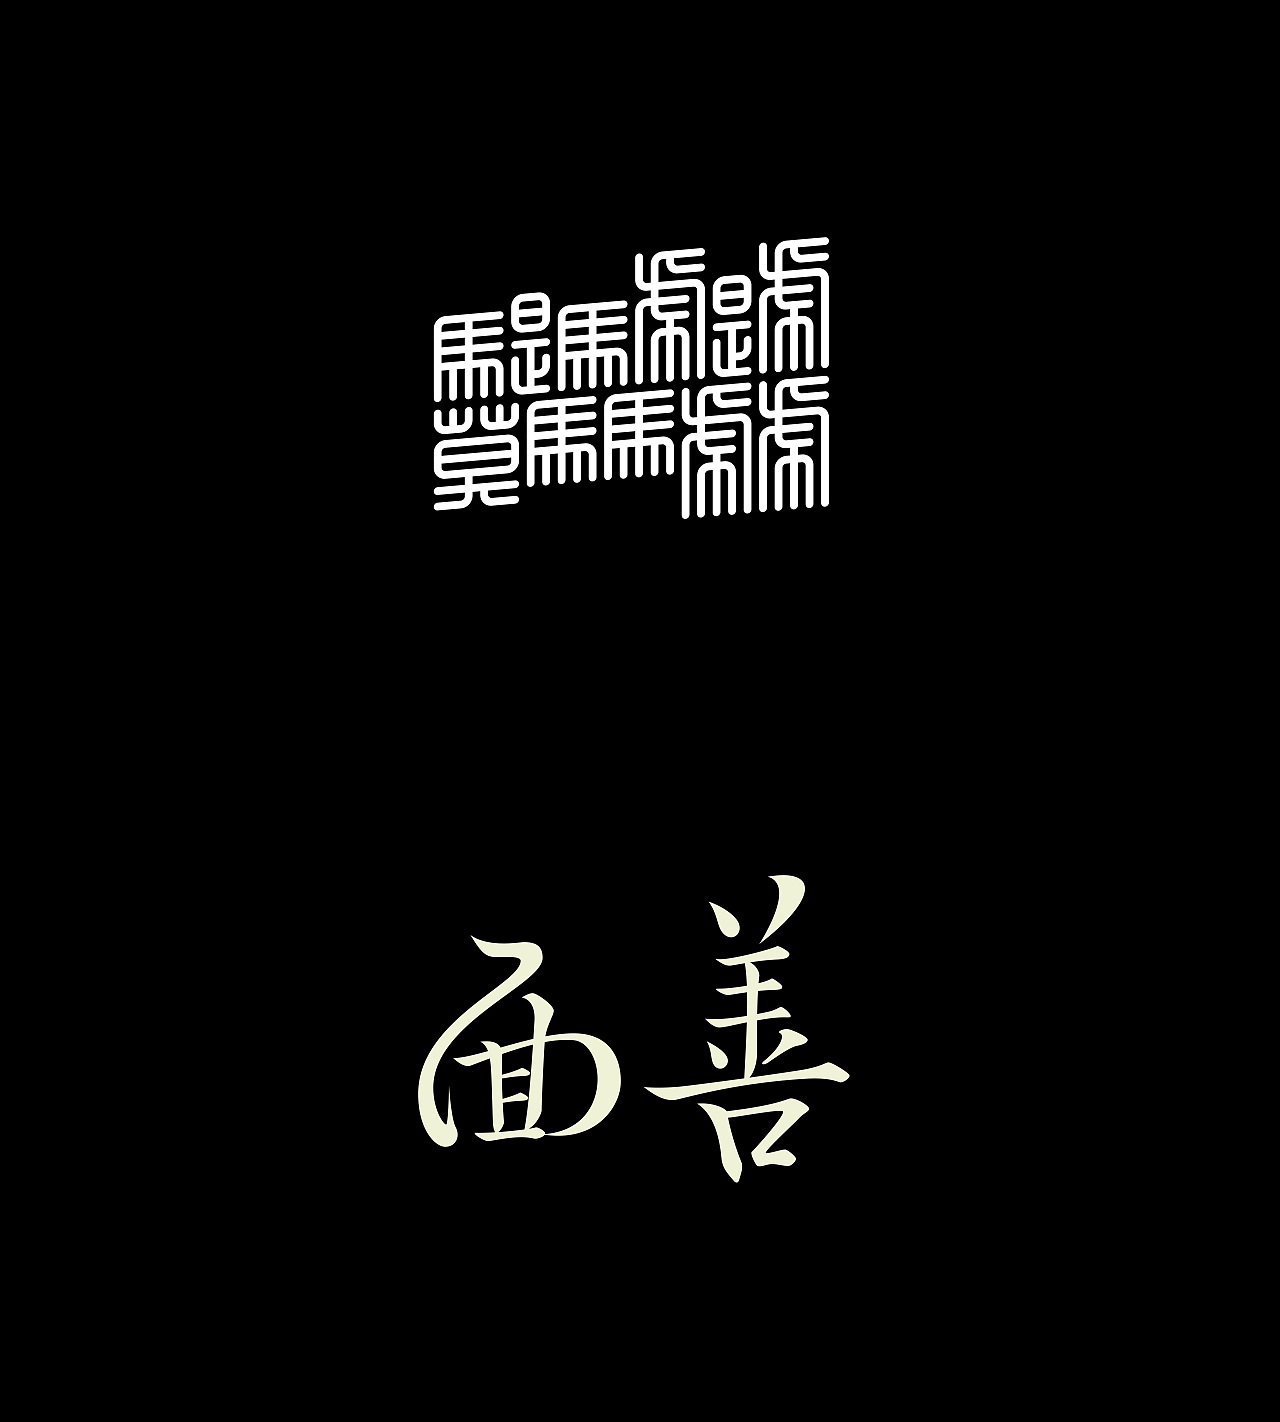 50 Chinese font design, you will absolutely love them!